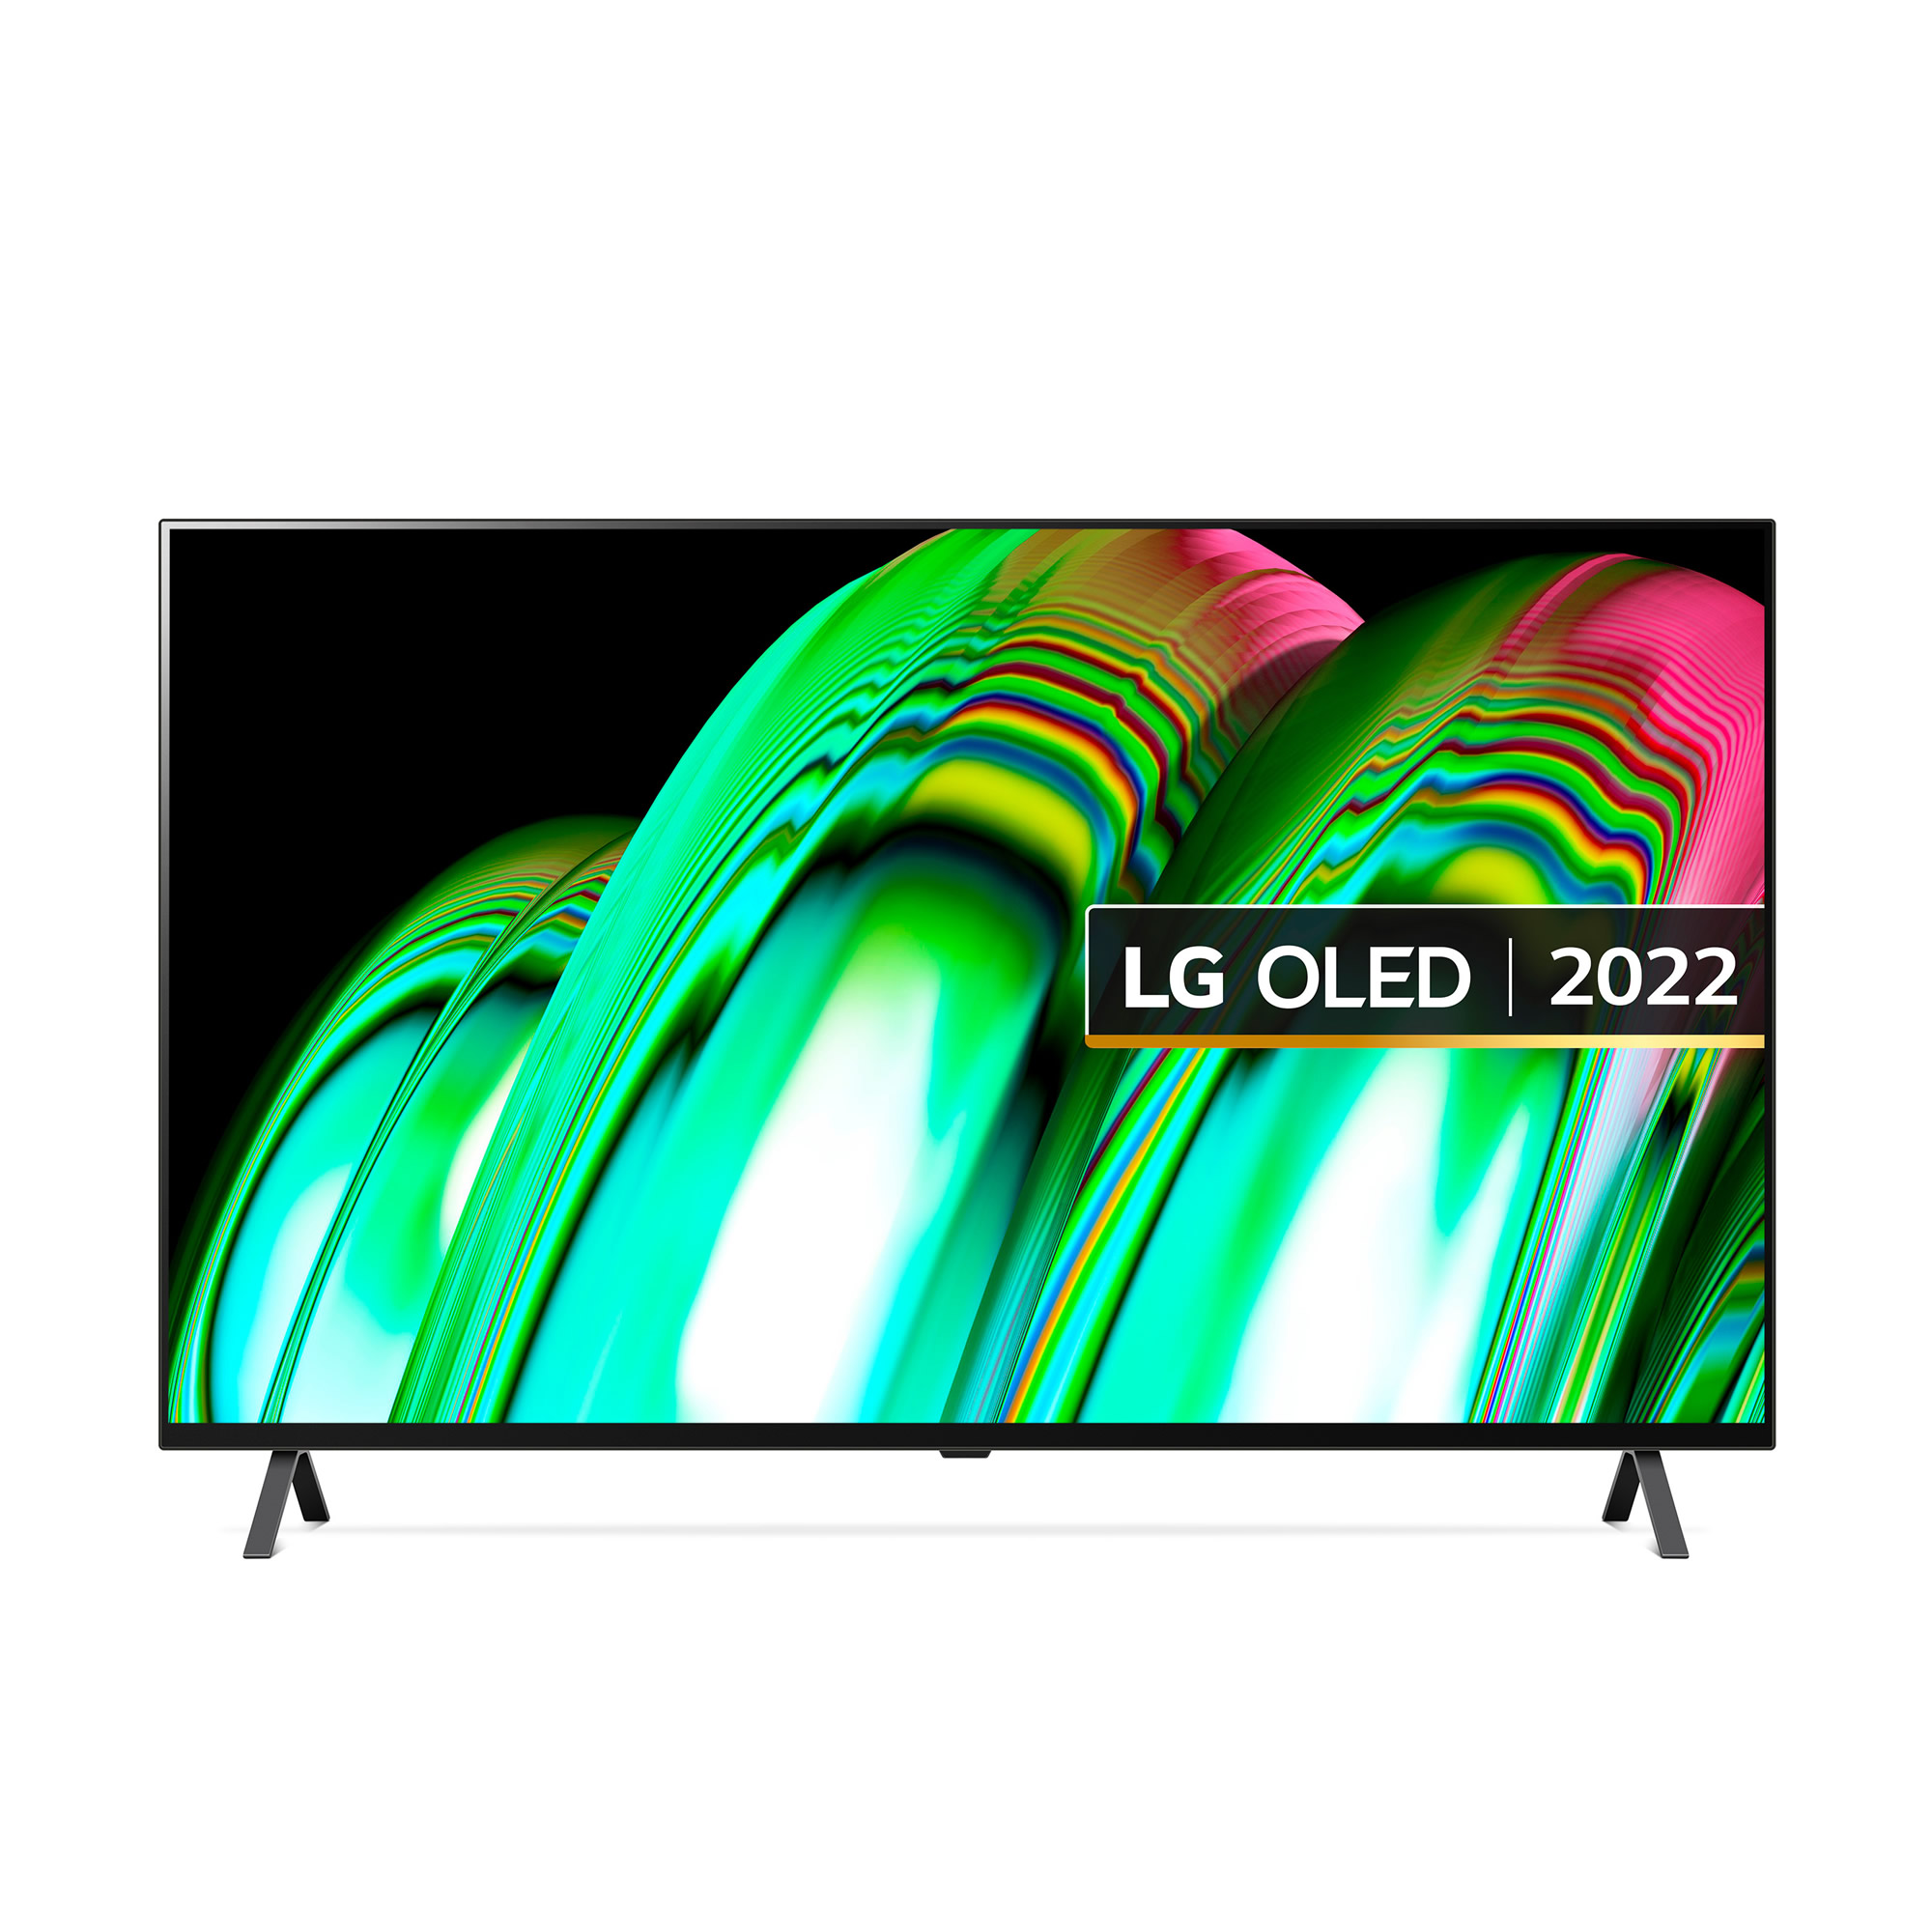 LG 48inch OLED HDR 4K UHD SMART TV WiFi Dolby Atmos